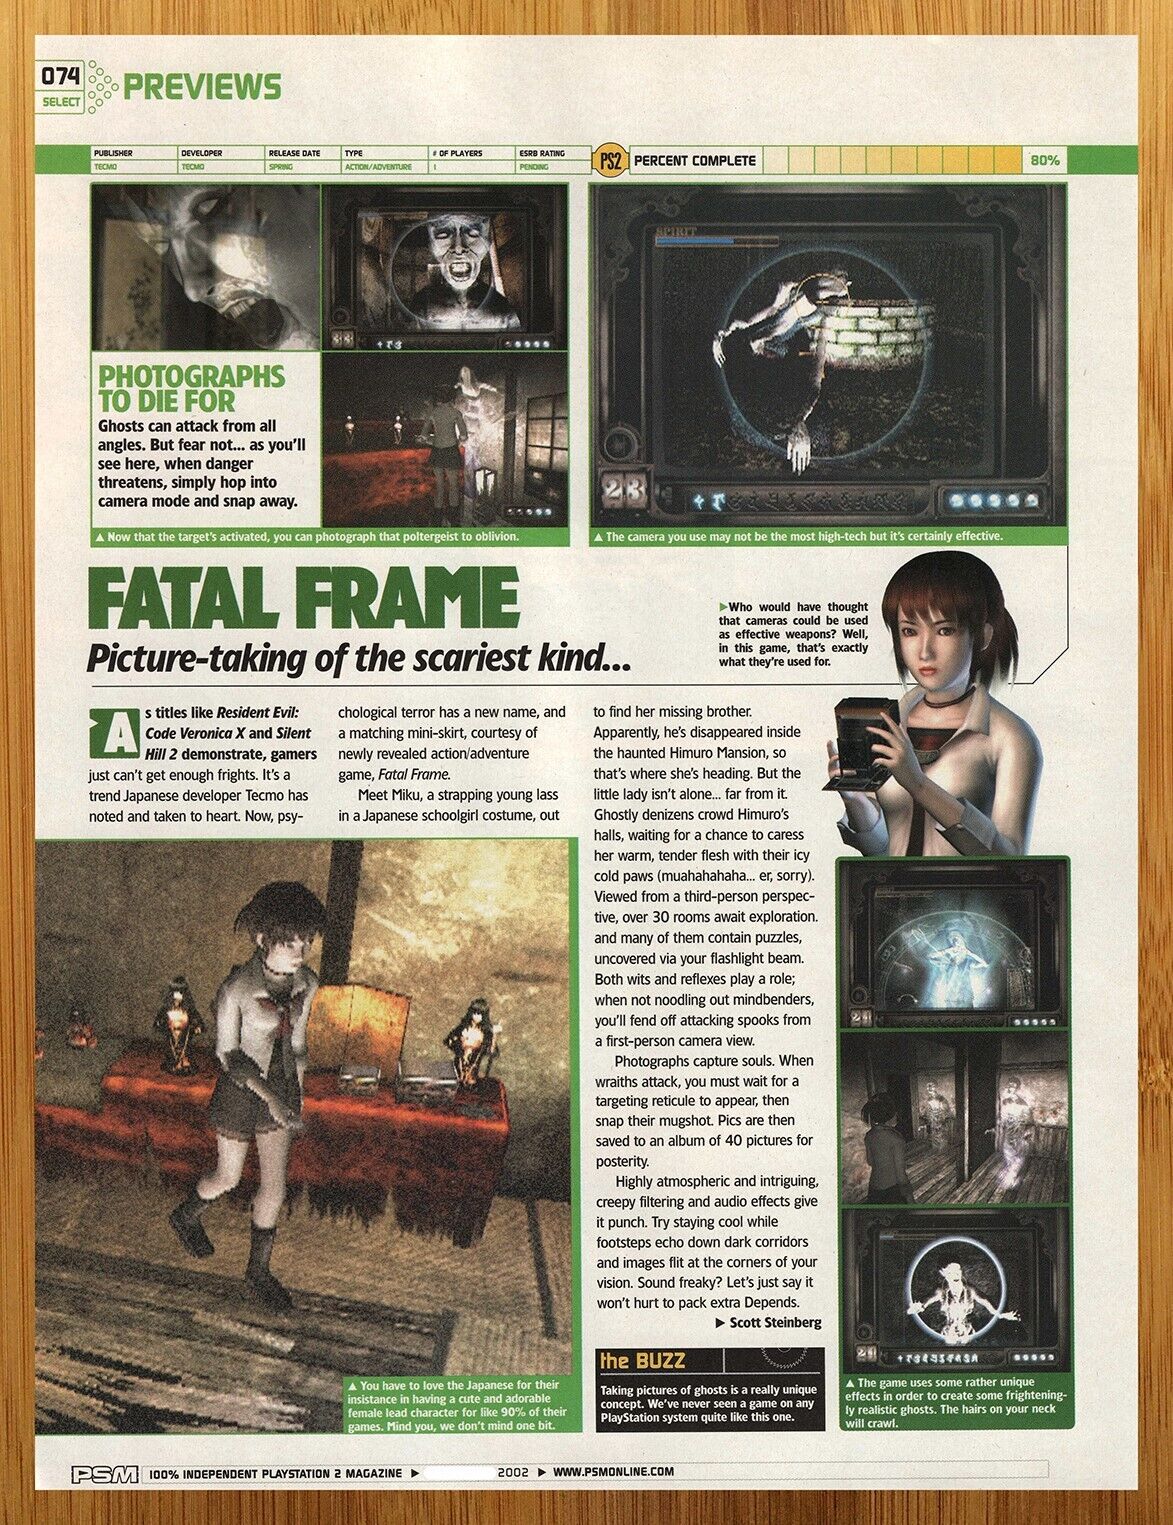 2001 Fatal Frame PS2 PREVIEW Print Ad/Poster Authentic Video Game Promo Art 00s